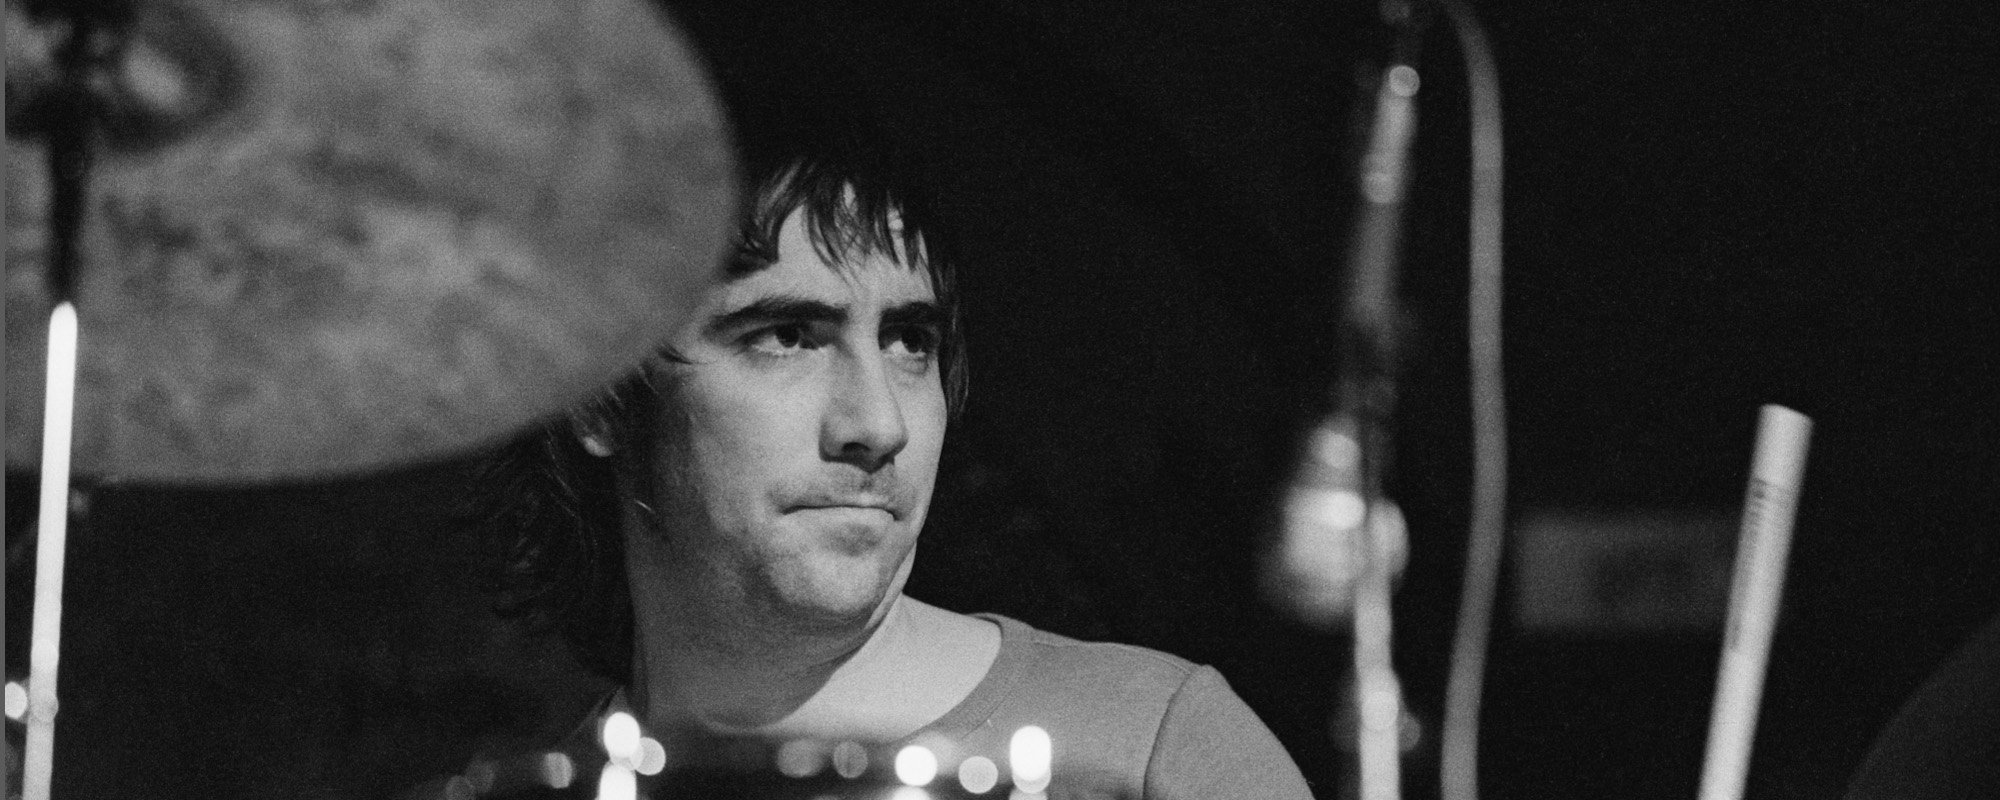 6 Bands with Drummers Who Died Too Early